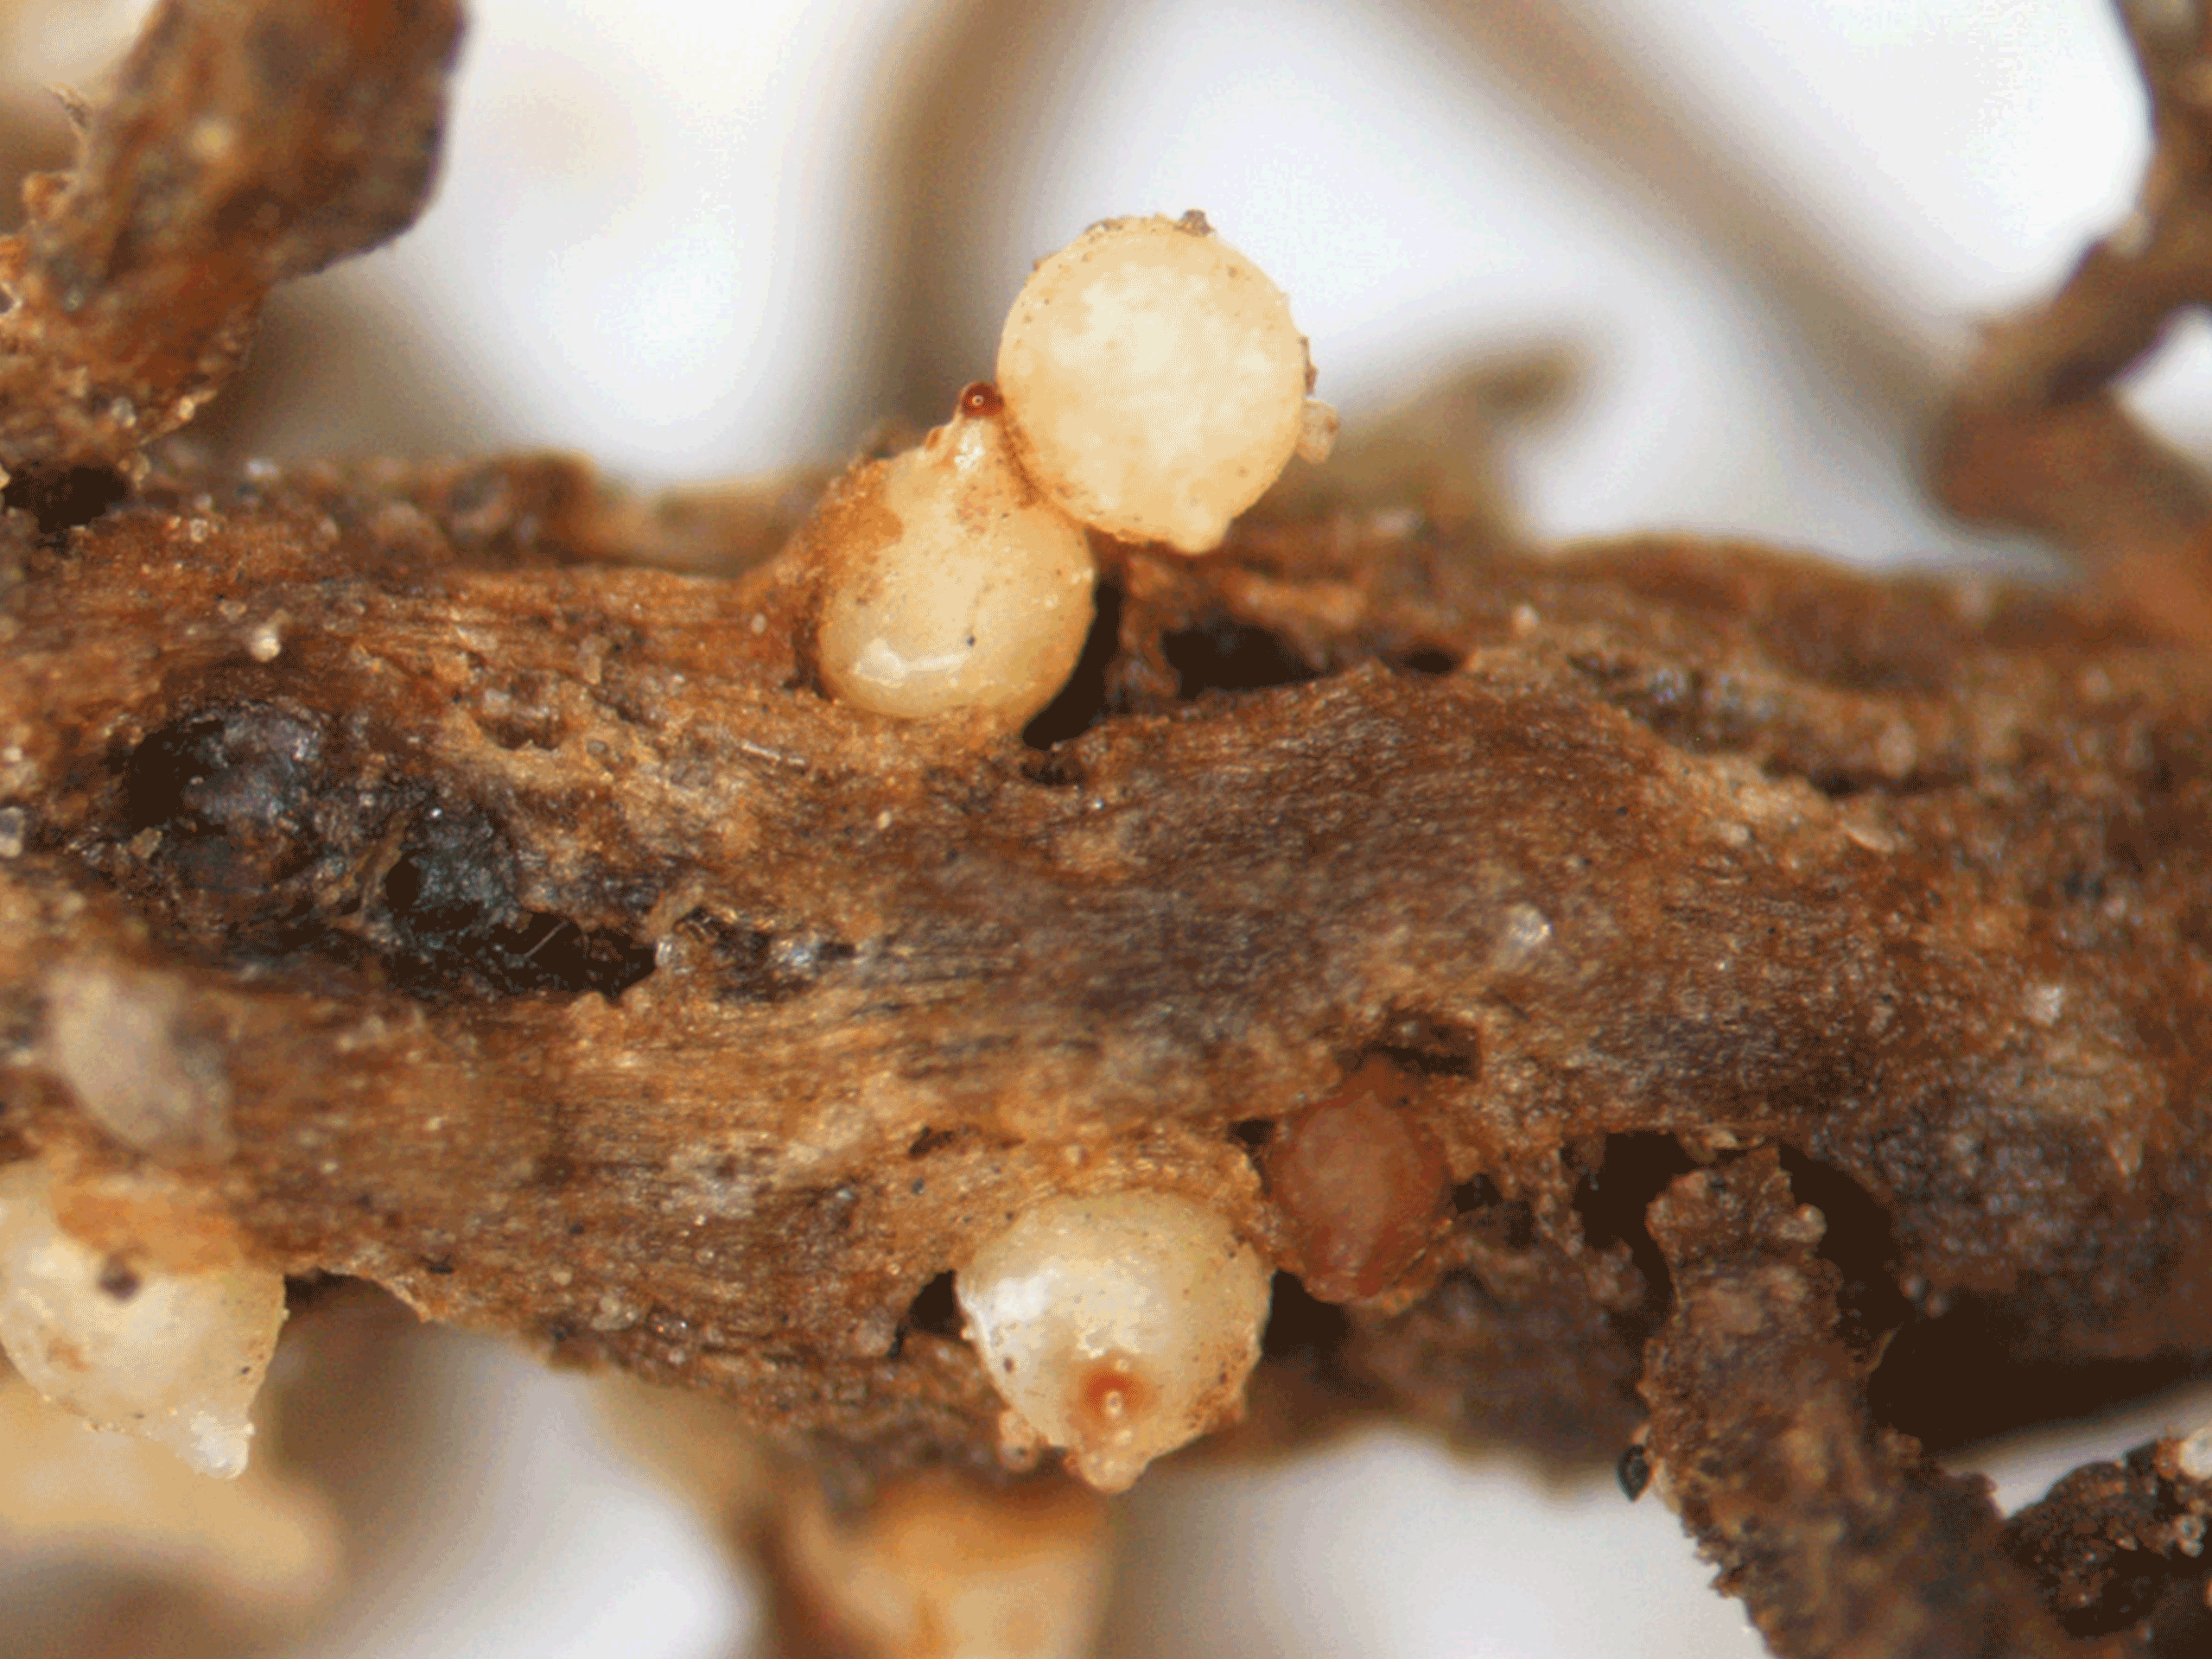 Nematodes on a soybean root.